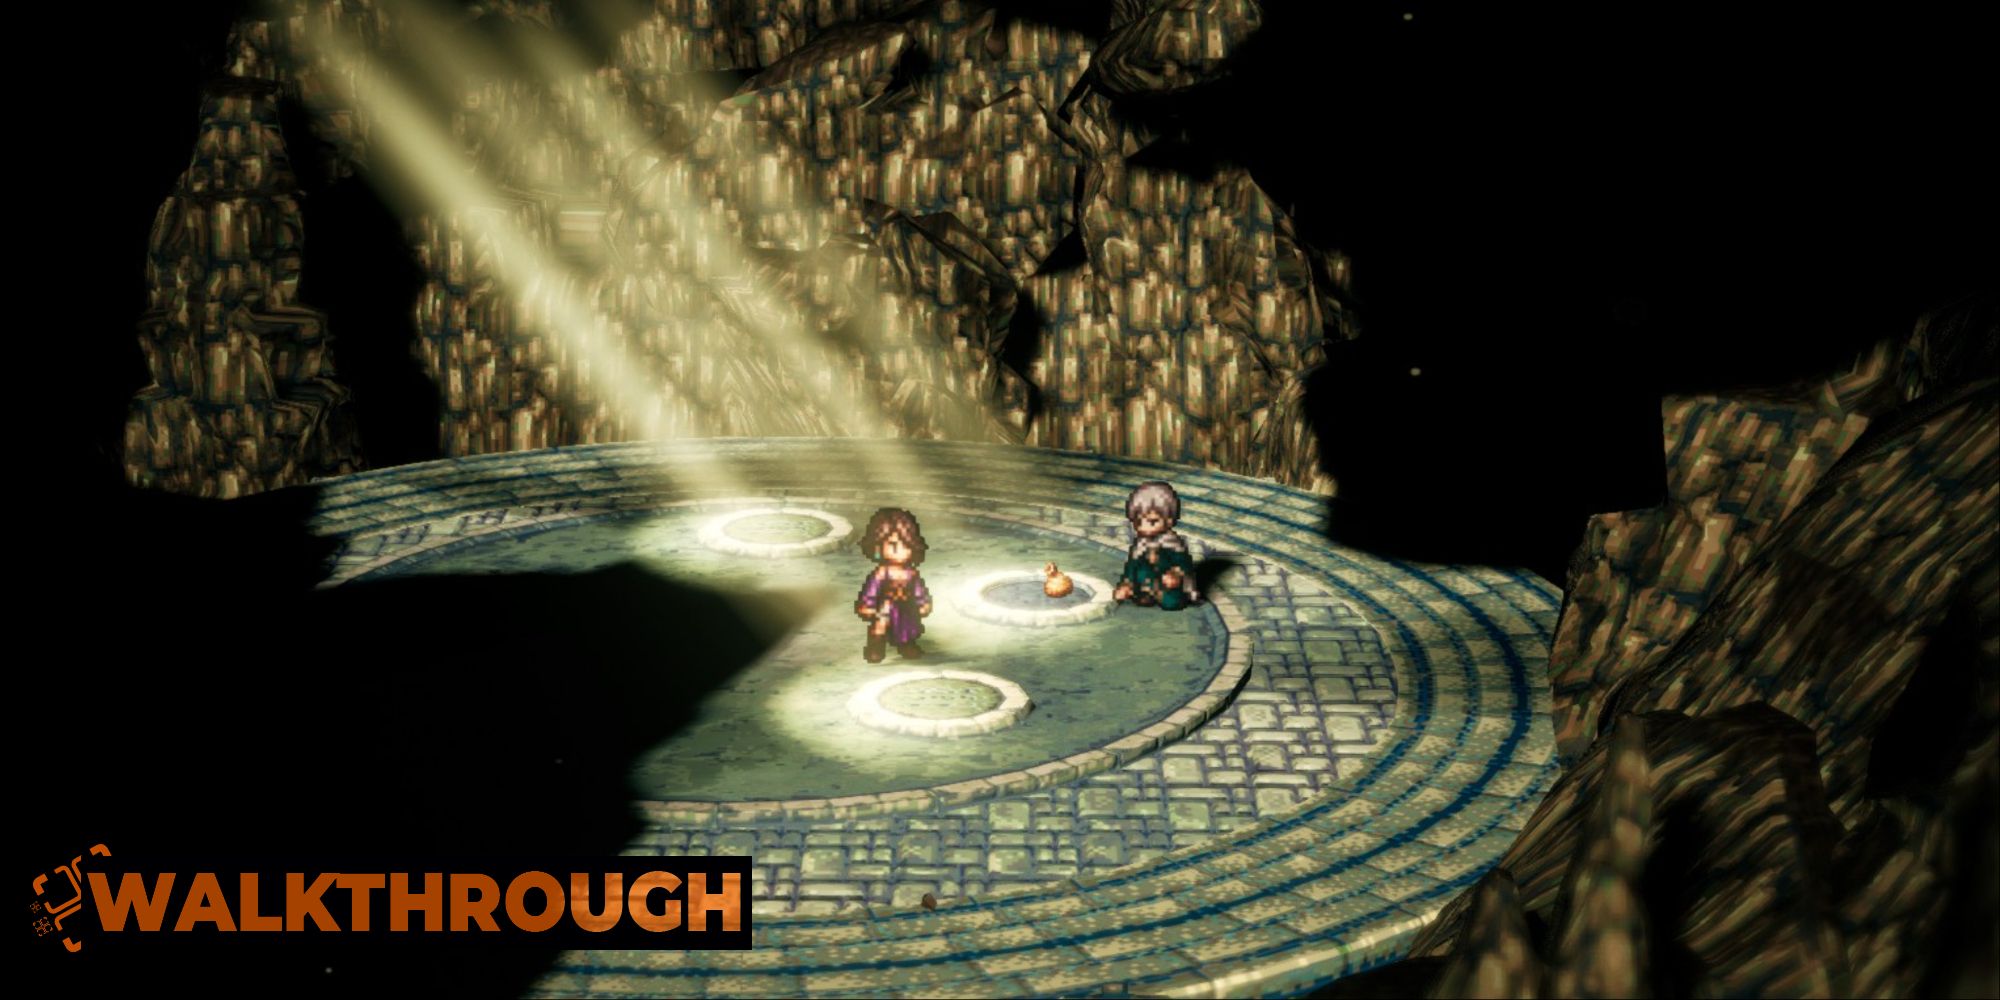 Octopath Traveler II - The Cleric and The Thief: Part 2